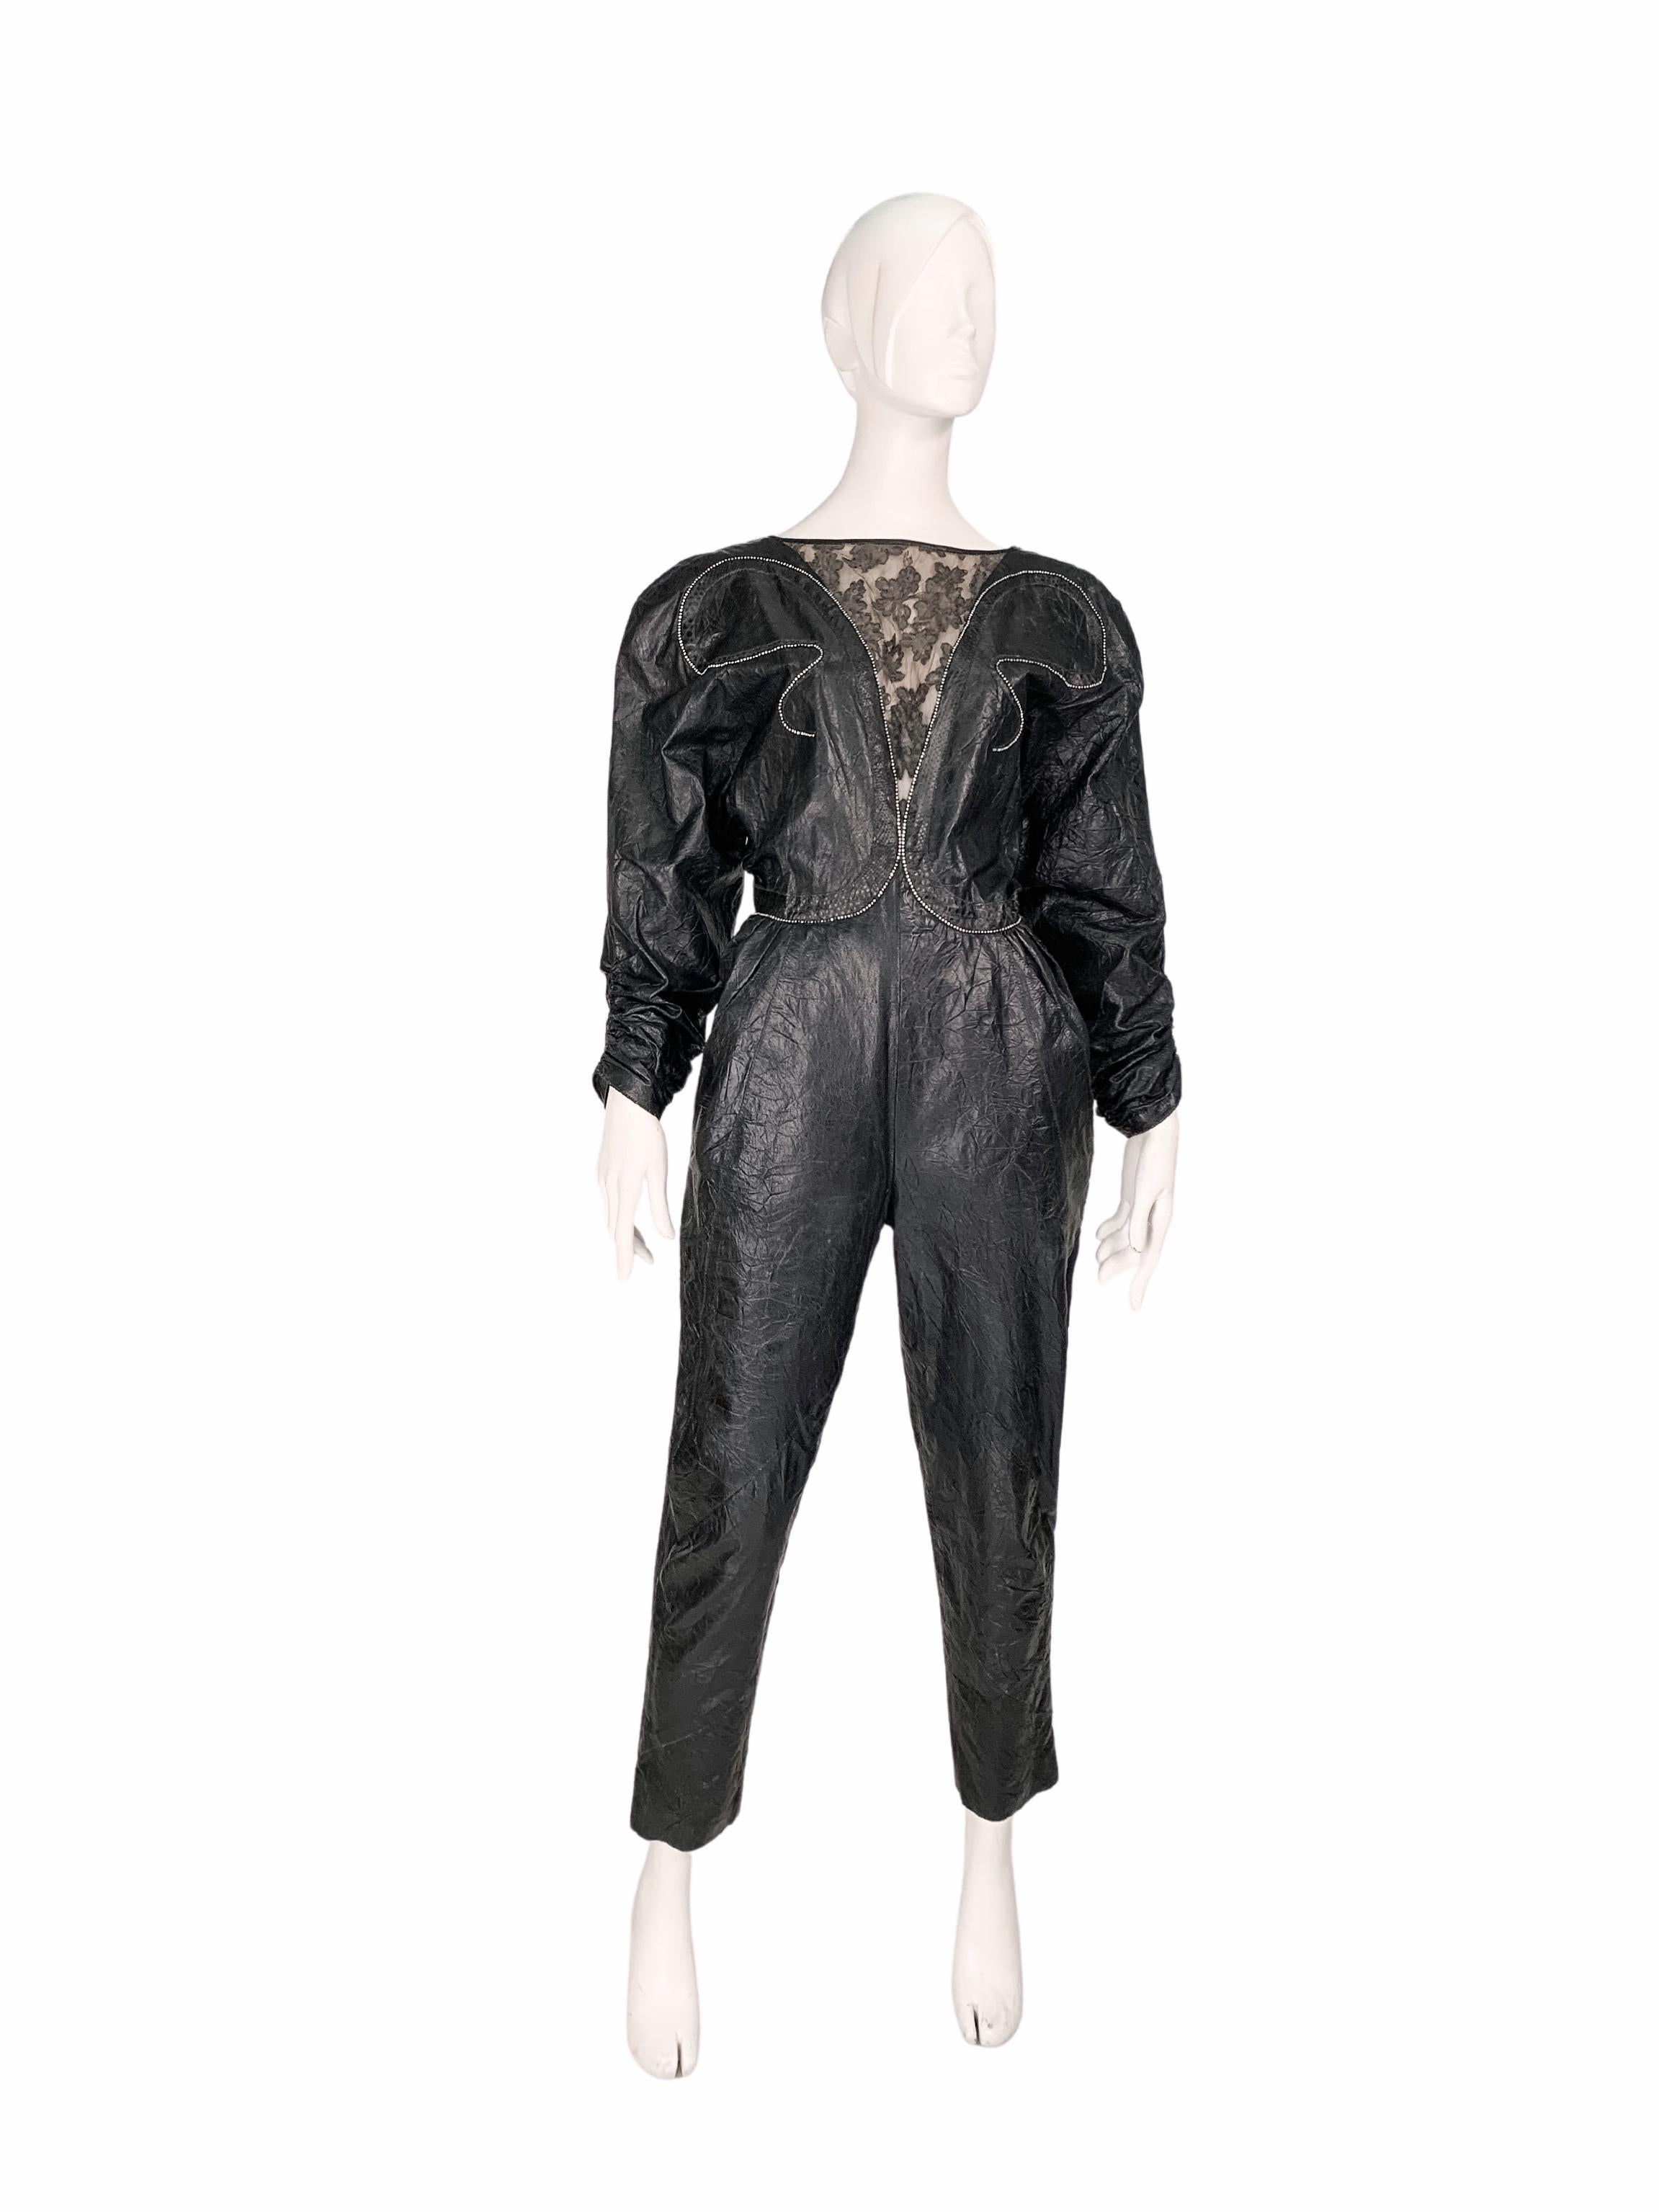 Roberto Cavalli vintage 1980s leather jumpsuit of a dramatic hourglass silhouette, with a low-cut back and sleek rhinestone embellishments. Fashioned in lightweight fine leather with a particular wrinkle-effect finish. Features a lace insert and a